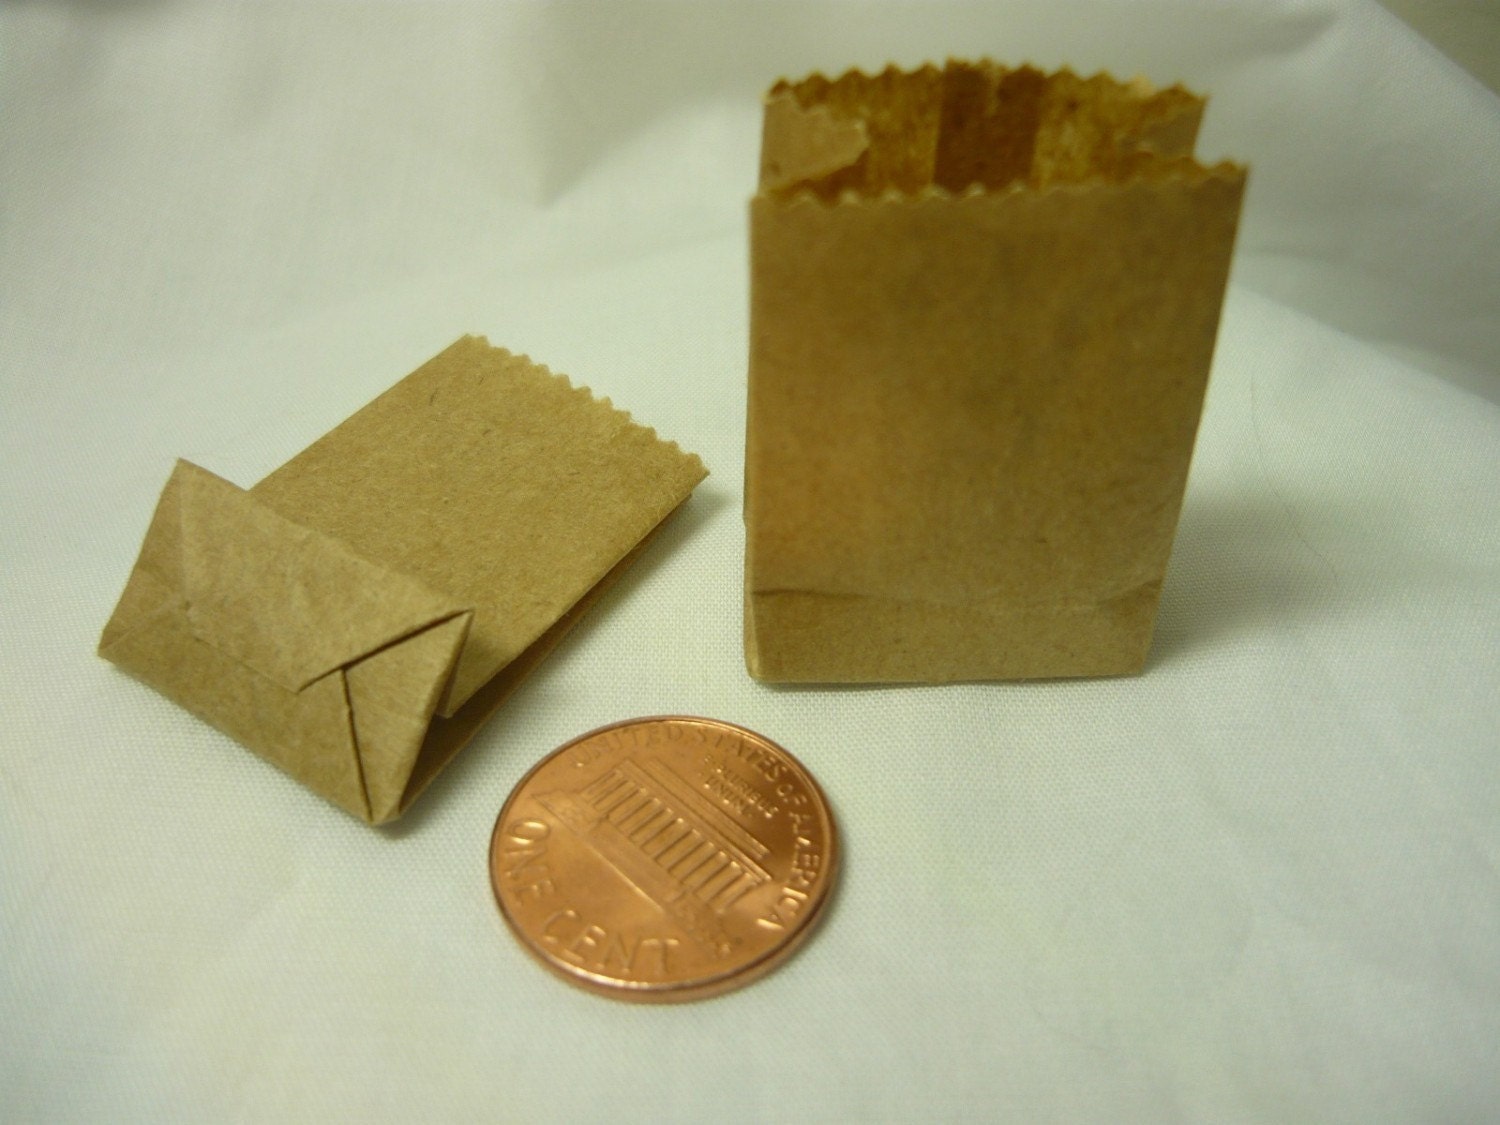 2 Miniature Brown Paper Grocery Bags 1/12 scale bag for